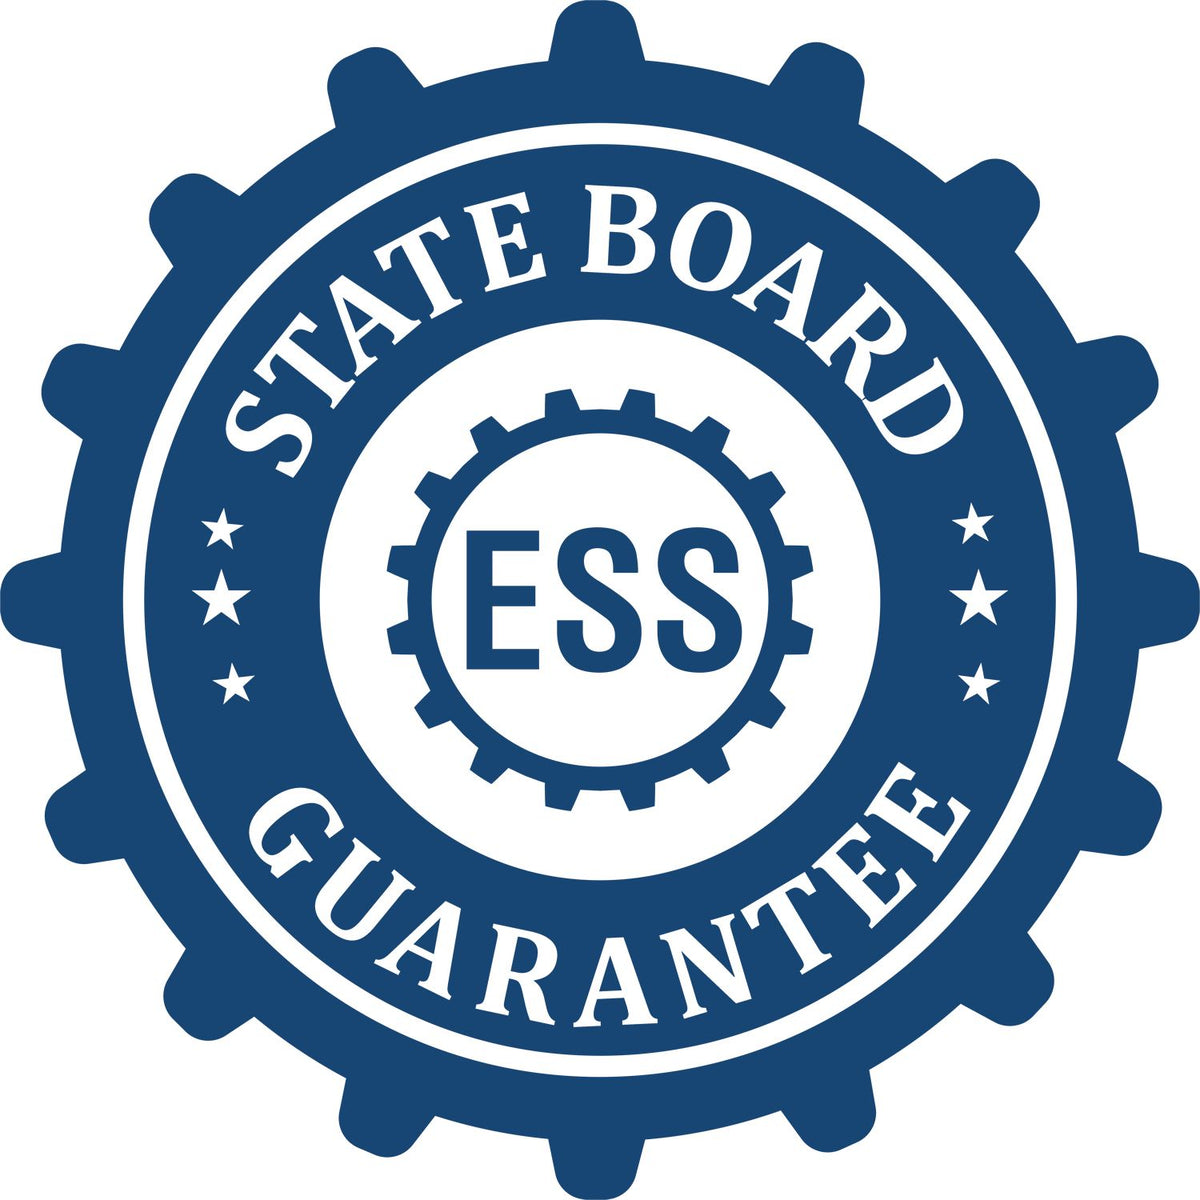 An emblem in a gear shape illustrating a state board guarantee for the New Jersey Geologist Desk Seal